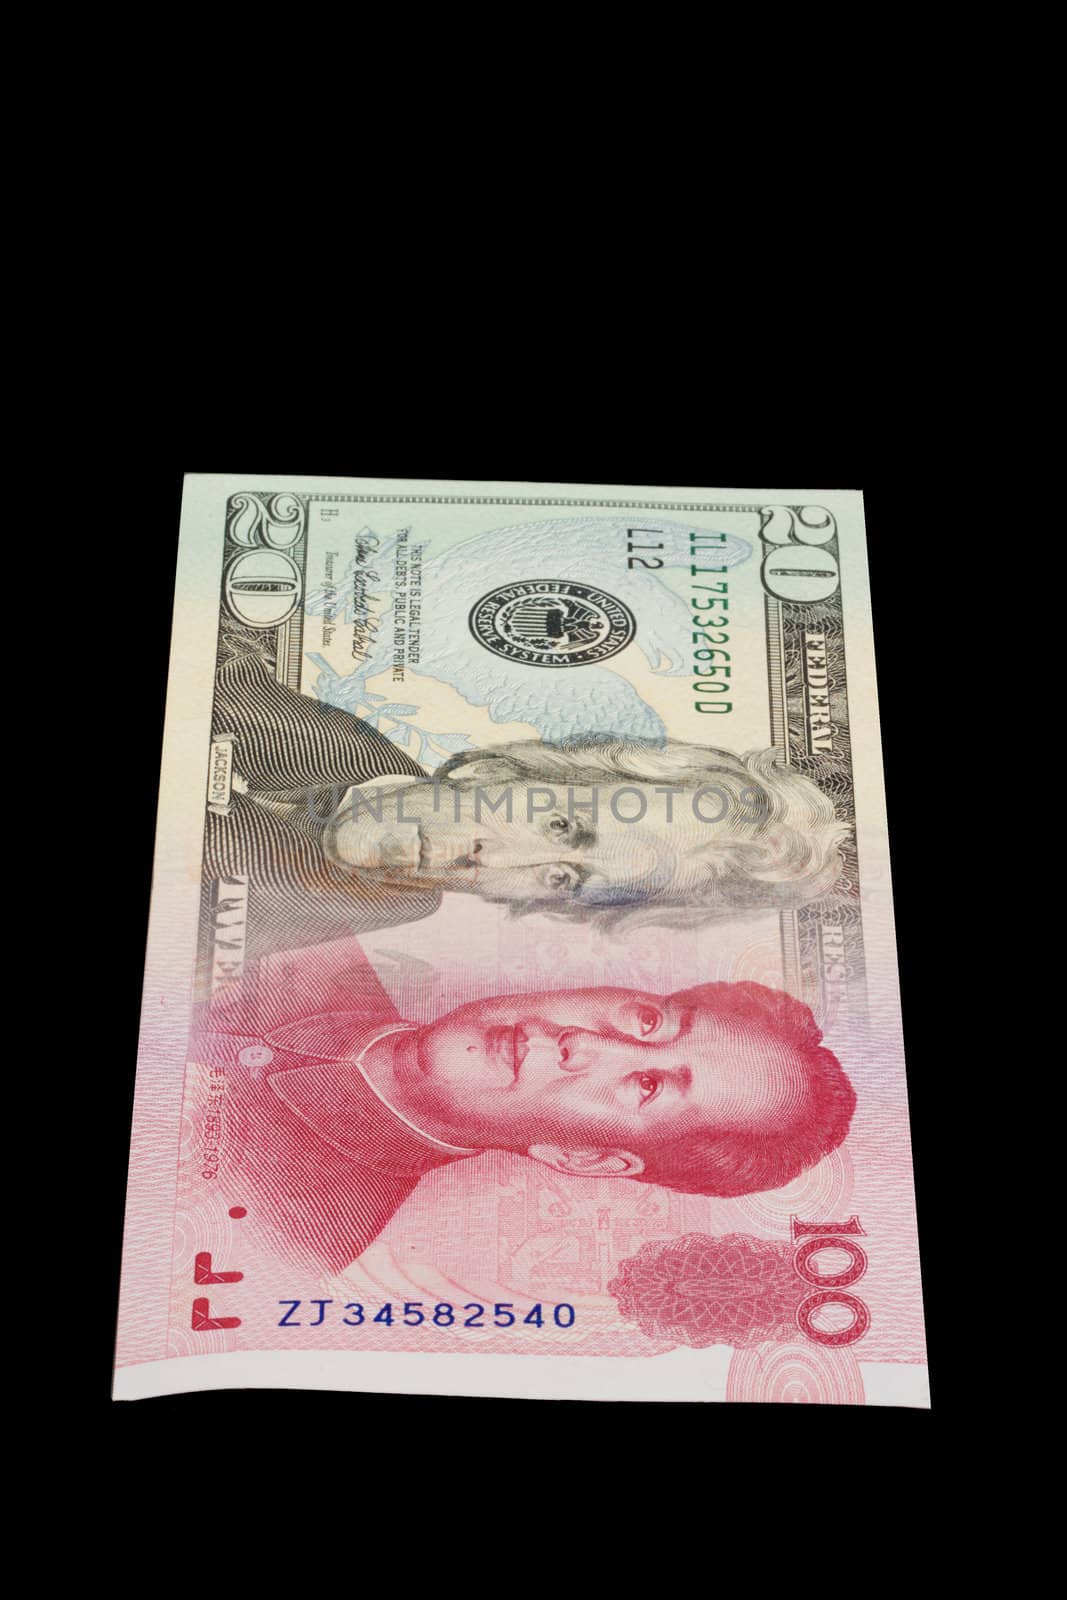 Currency morph of USA 20 dollar bill and China 100 RMB with close placement of Andrew Jackson and Mao depicting modern currency challenges